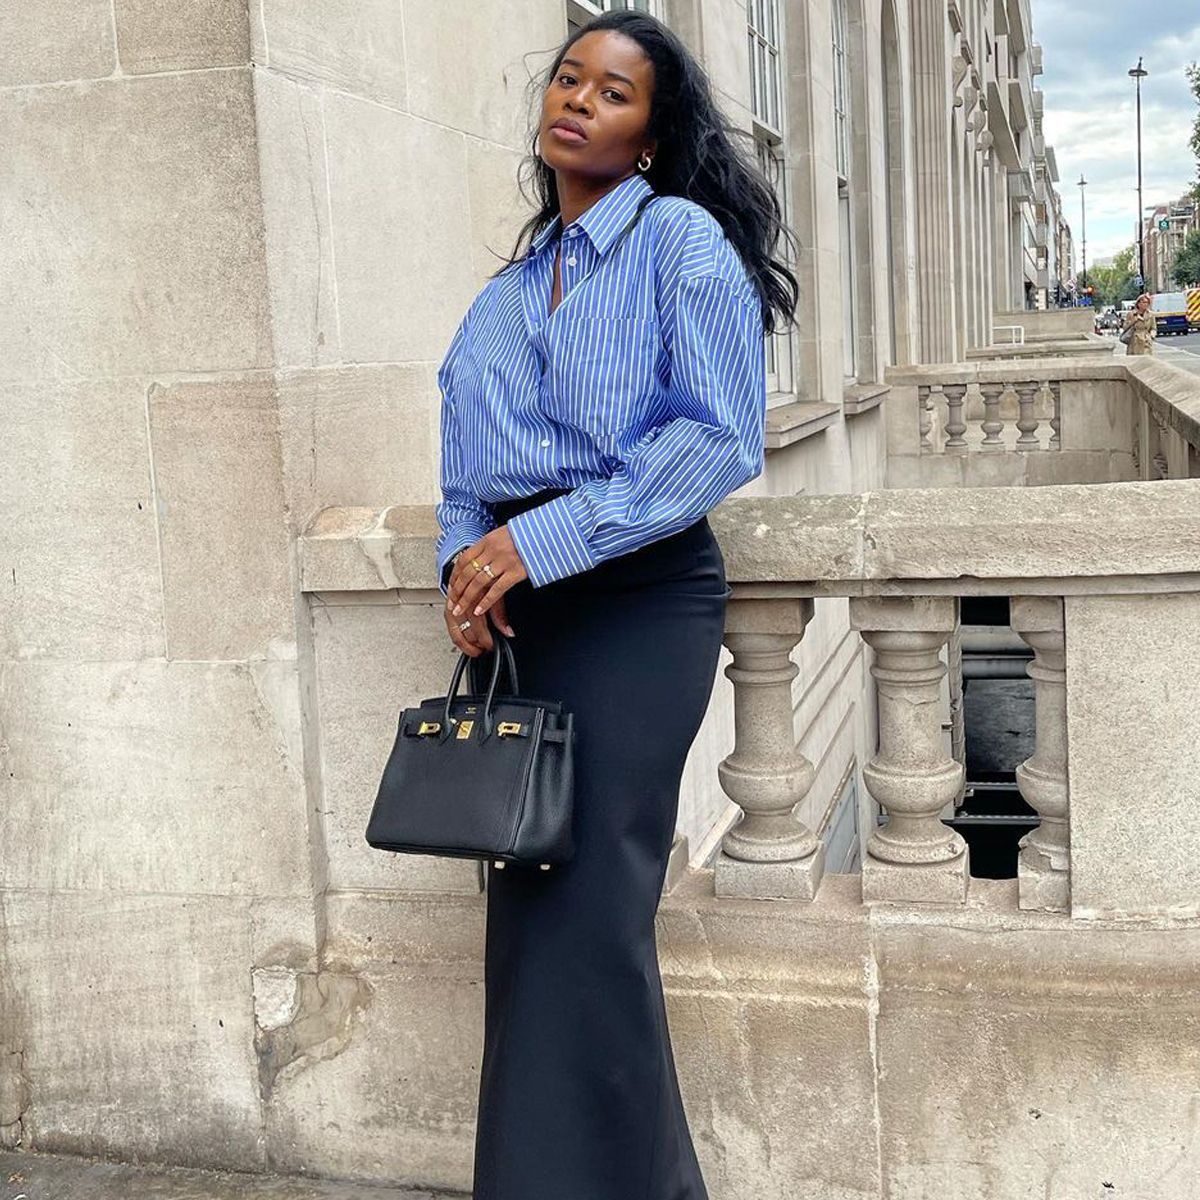 Photos + Links: Styling a Chic Slit Skirt Date Night Outfit